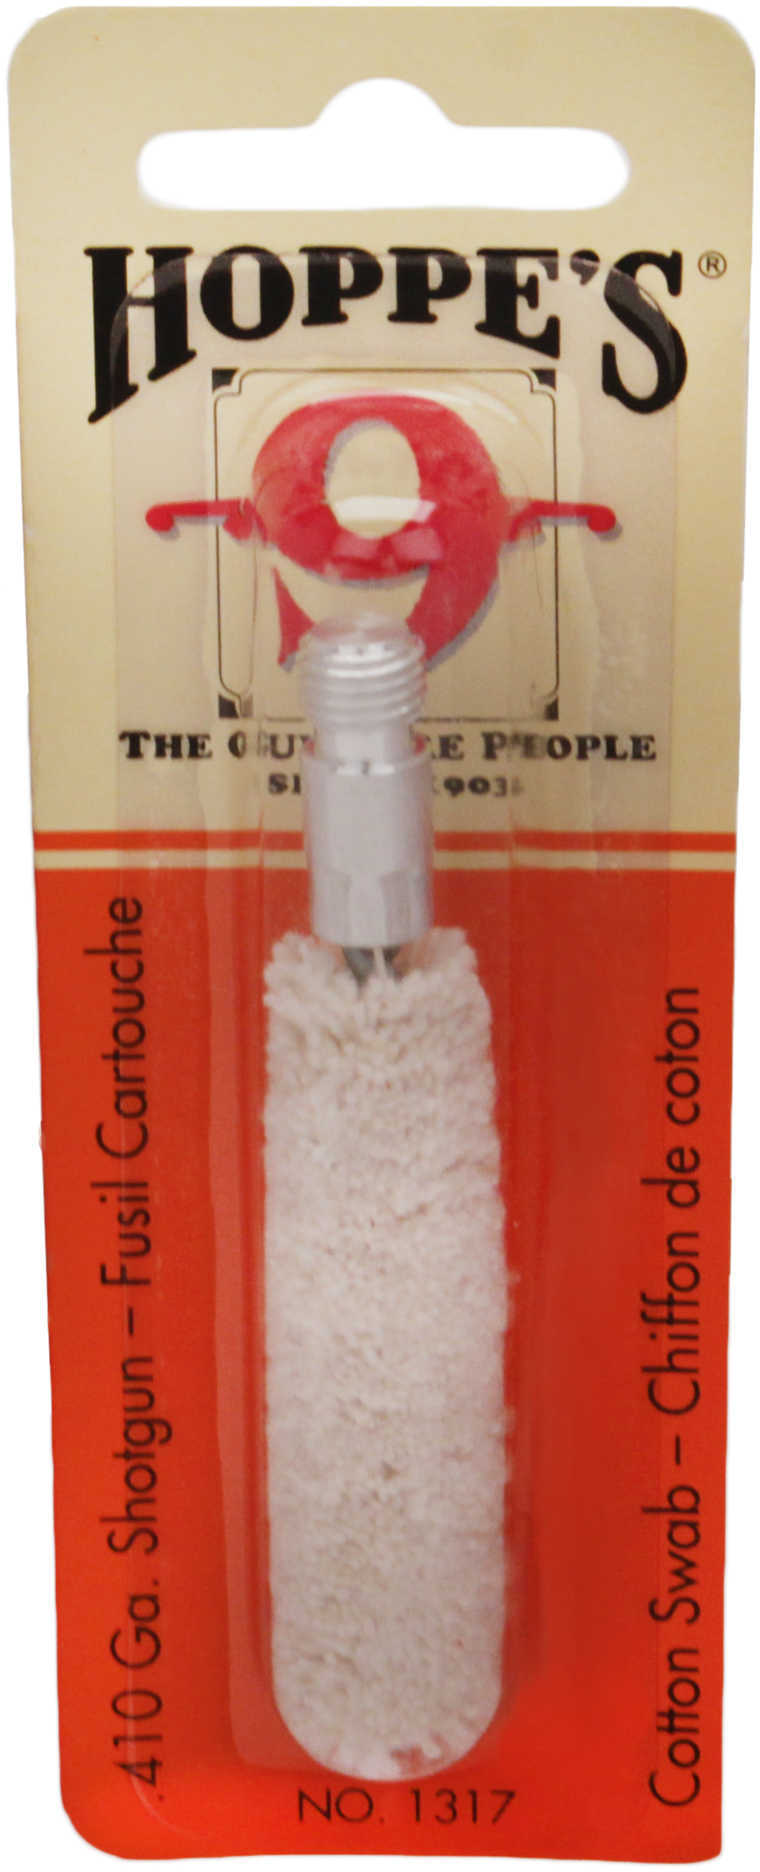 Hoppes Shotgun Cleaning Swab .410 Gauge 100% Cotton Swabs Are Soft, Washable And Will Not Scratch The Bore